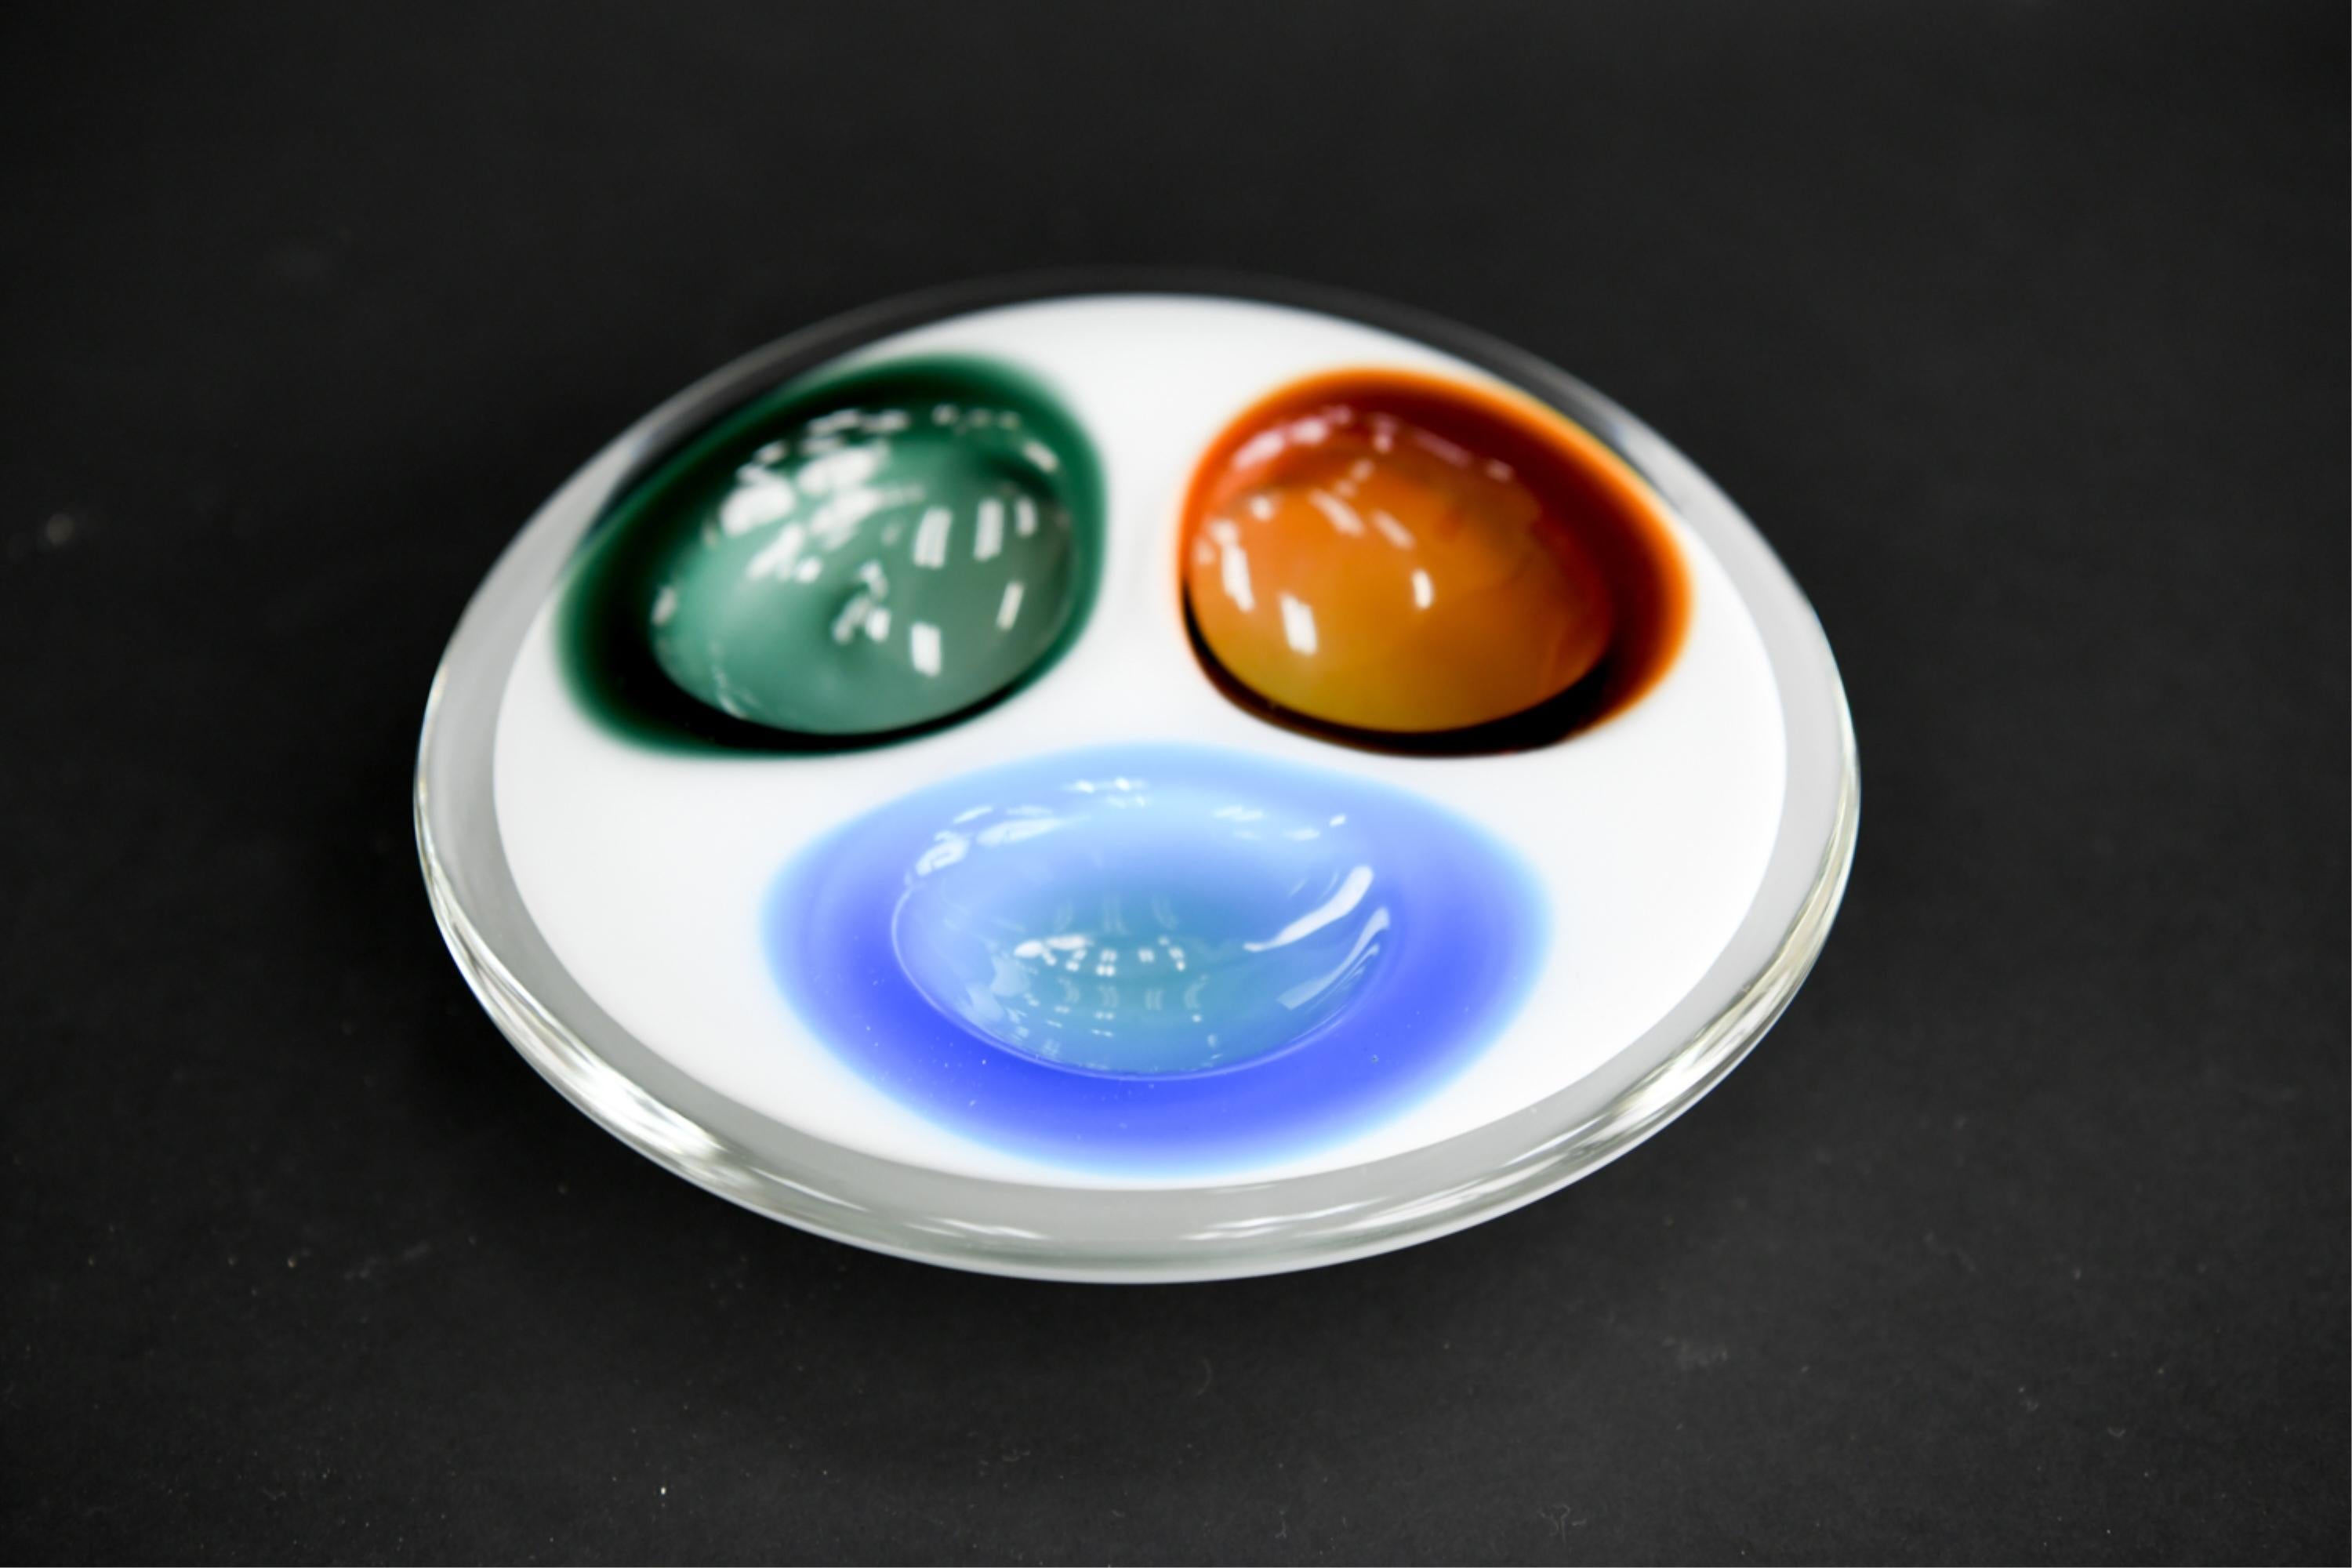 Sculptural glass dish with three colorful compartments.